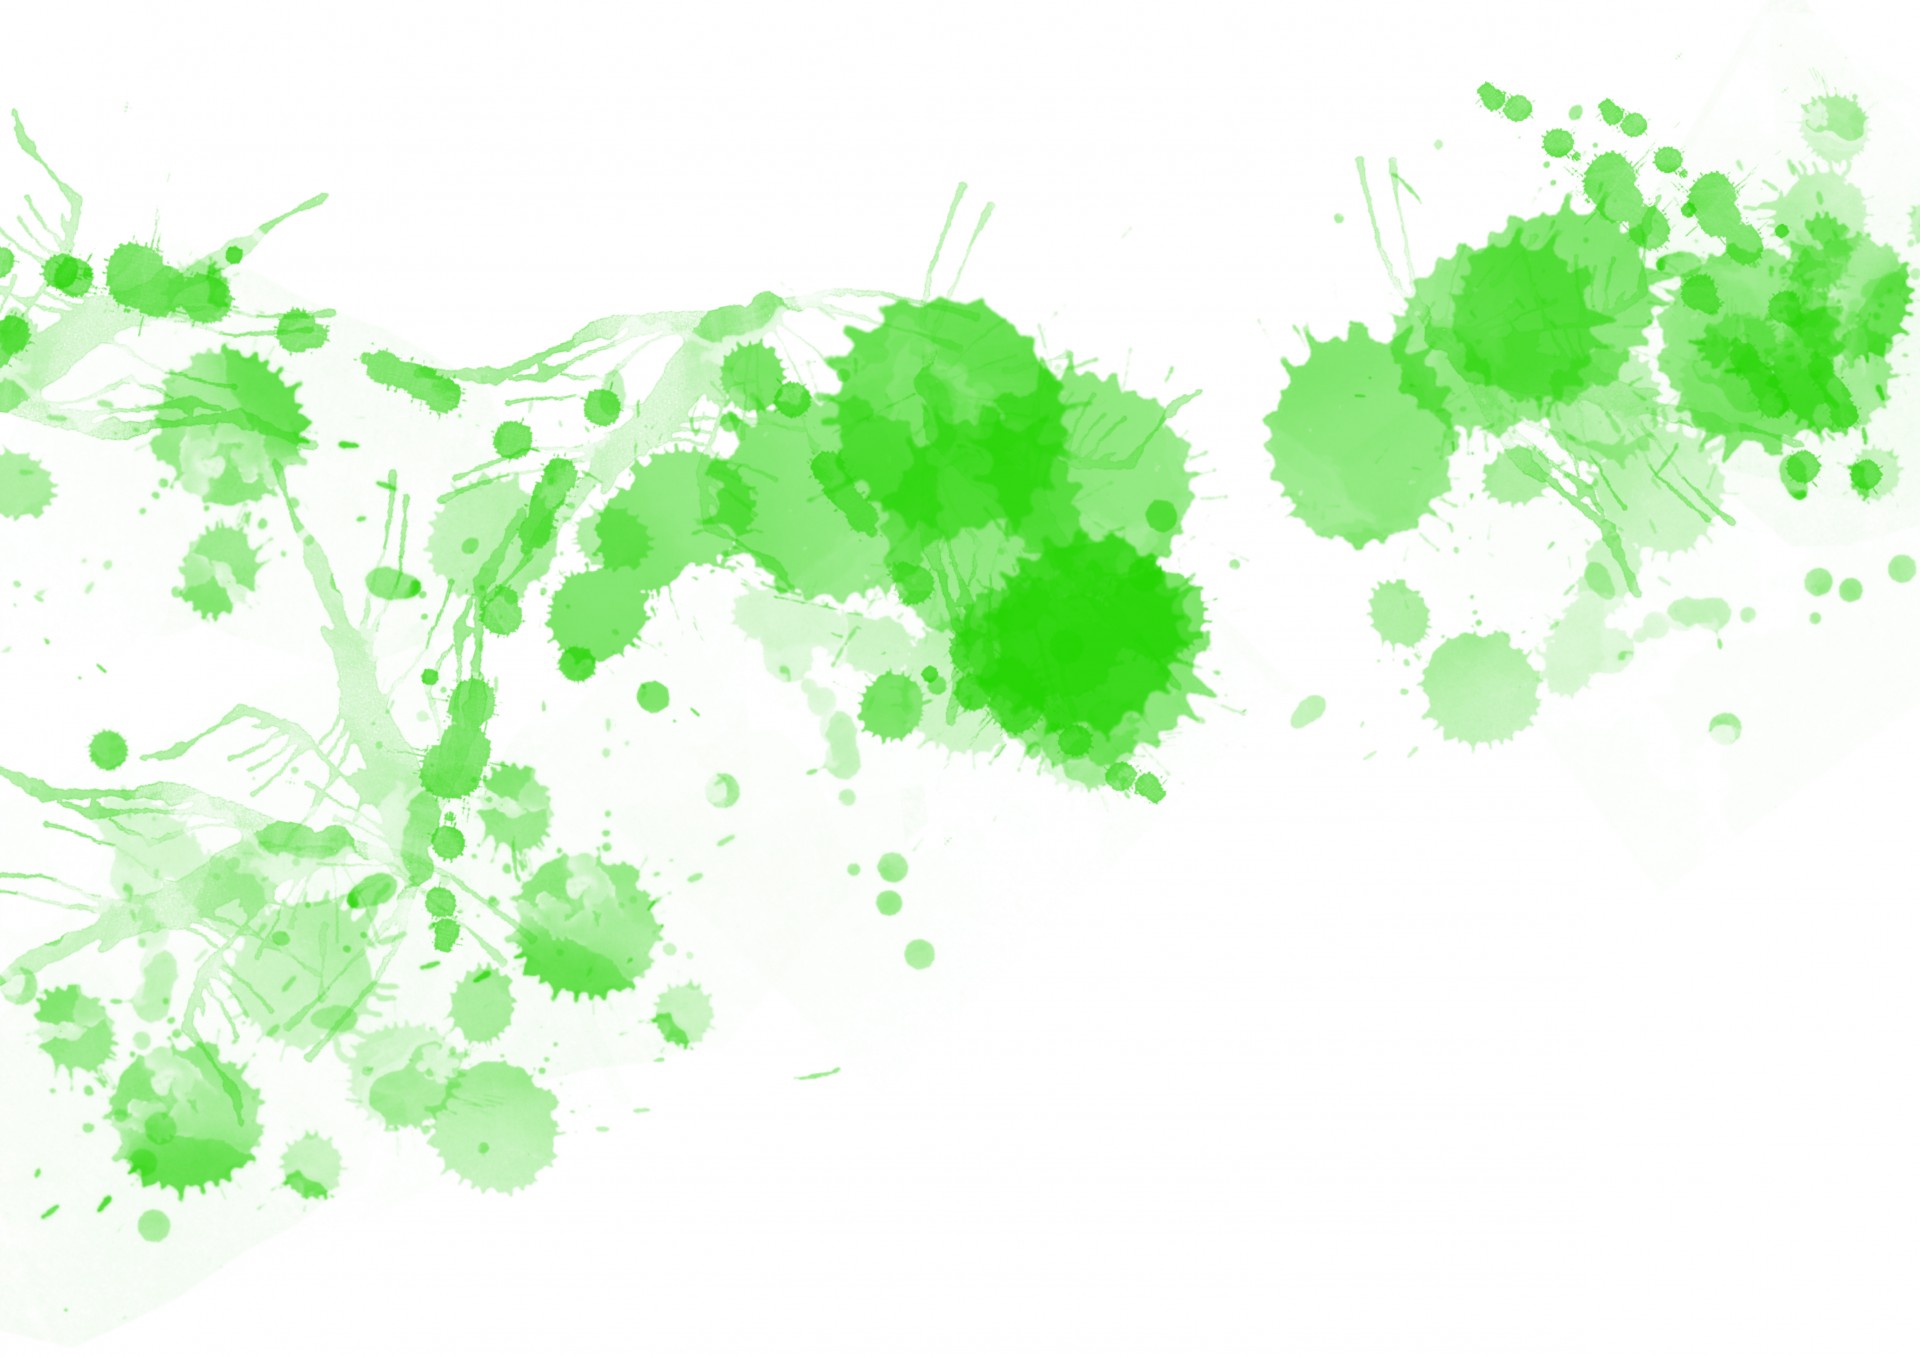 Digitally painted green paint splats on a white background.